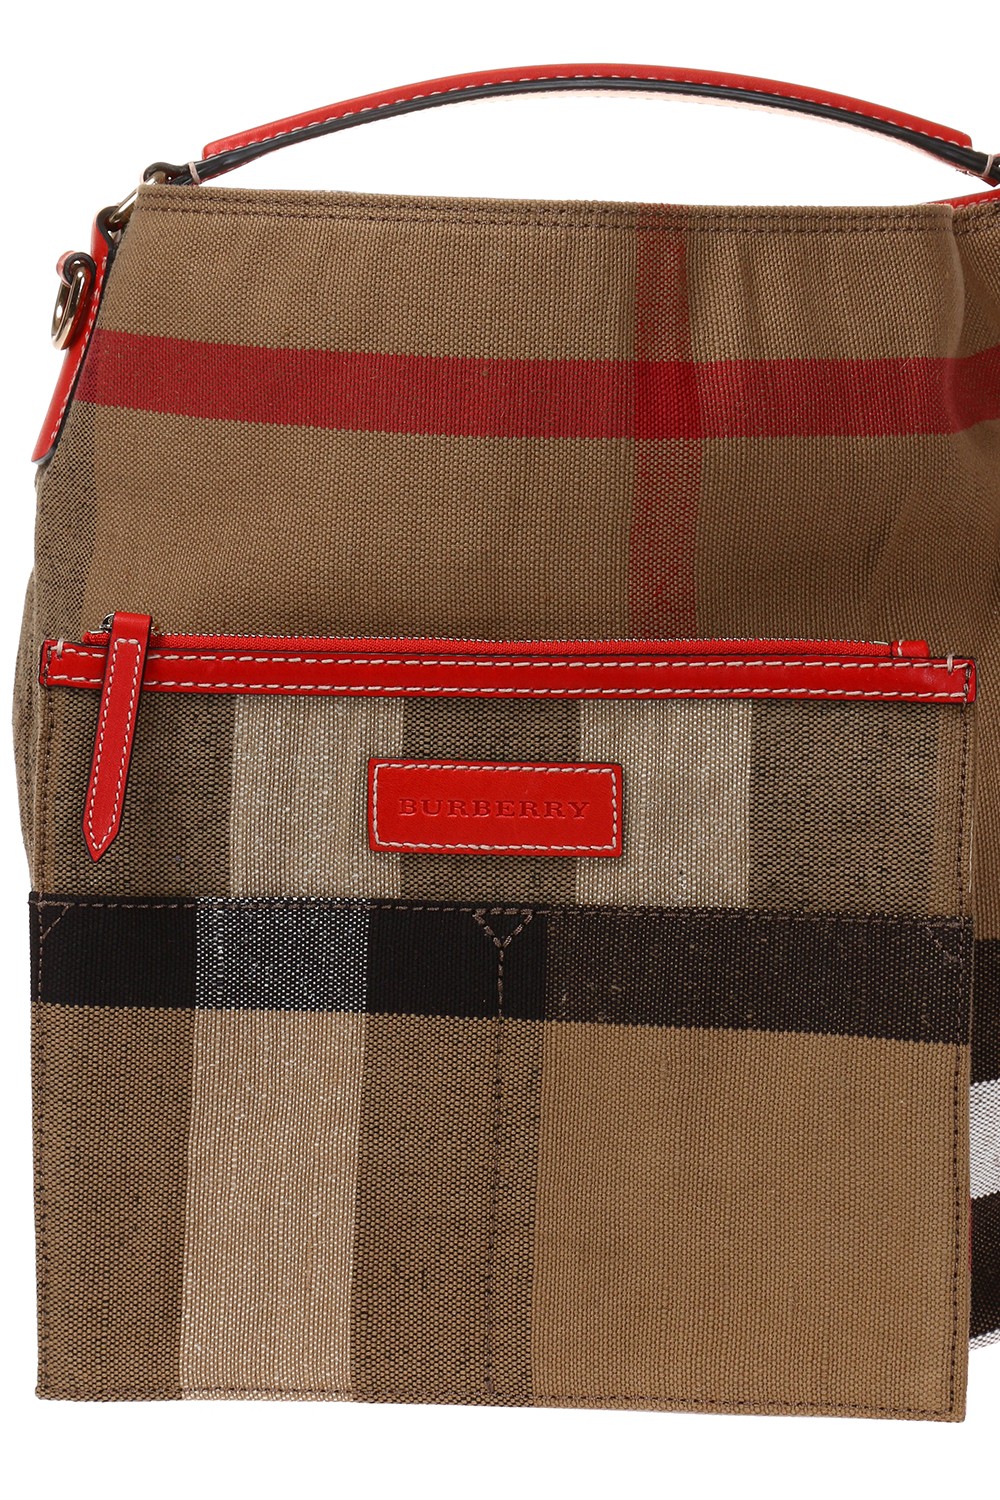 Burberry Large Ashby Cotton, Jute and Leather Shoulder Bag in Red